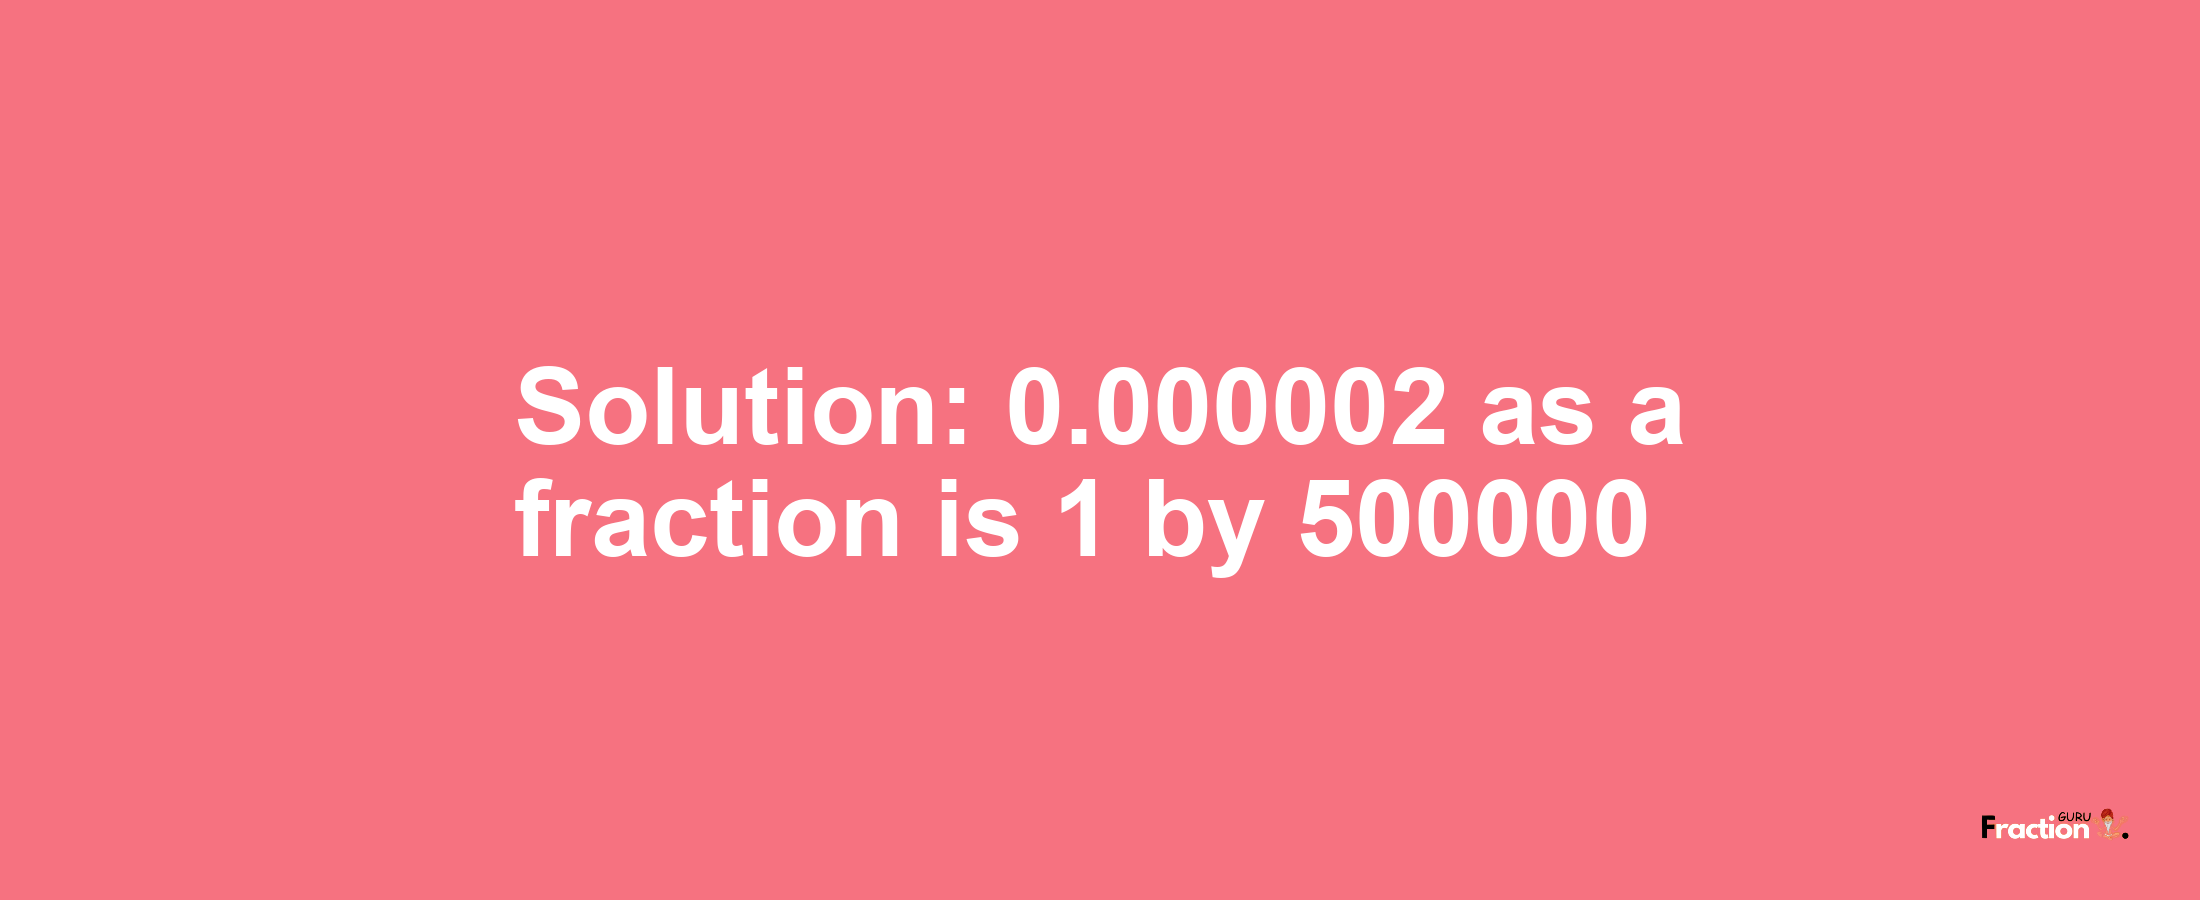 Solution:0.000002 as a fraction is 1/500000